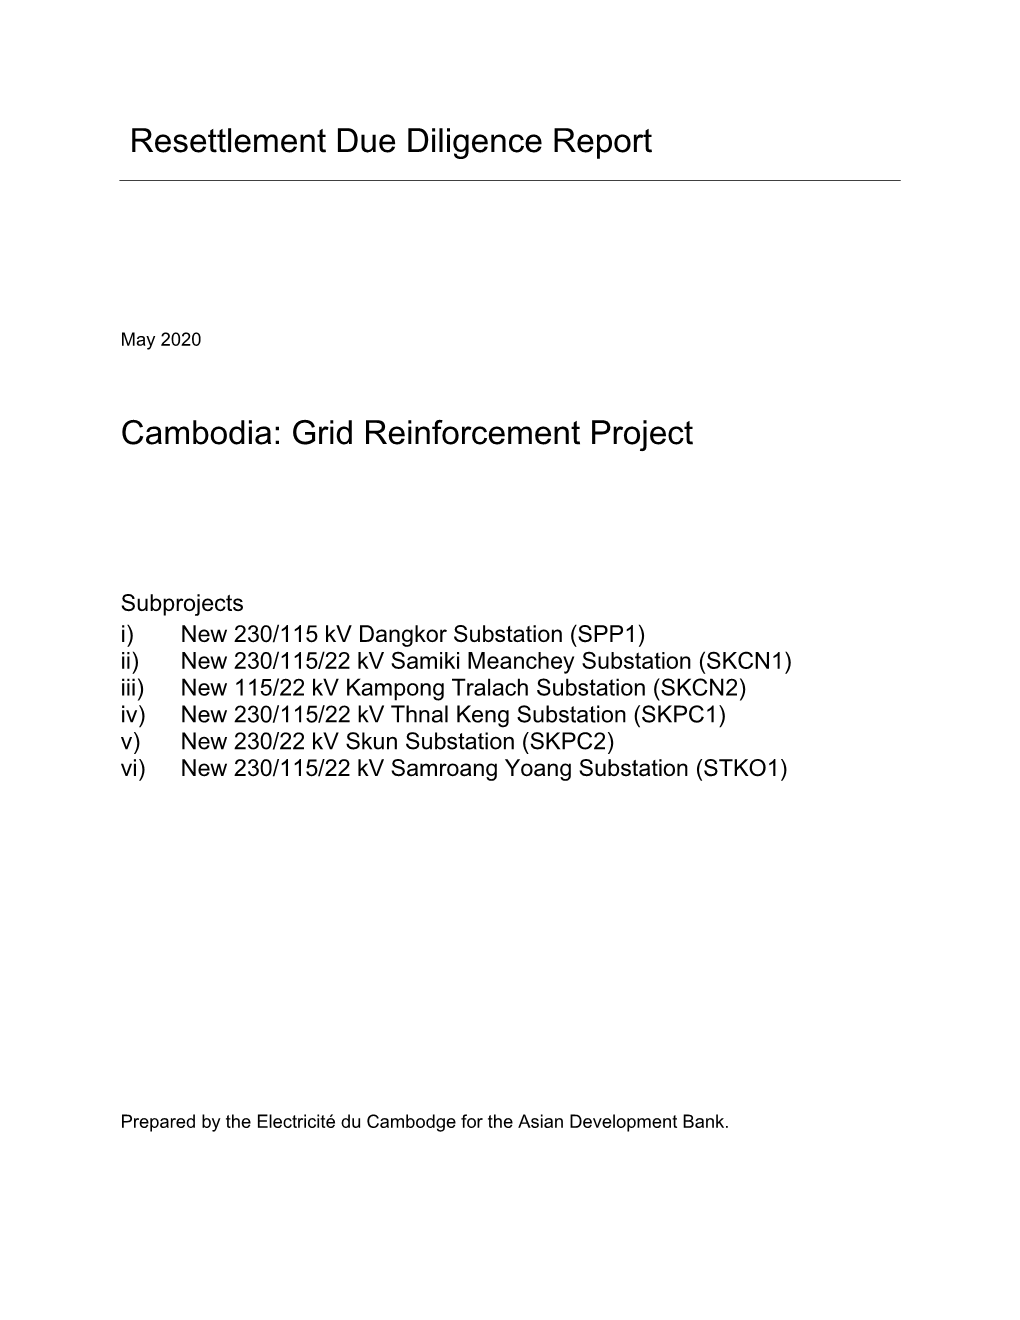 Resettlement Due Diligence Report Cambodia: Grid Reinforcement